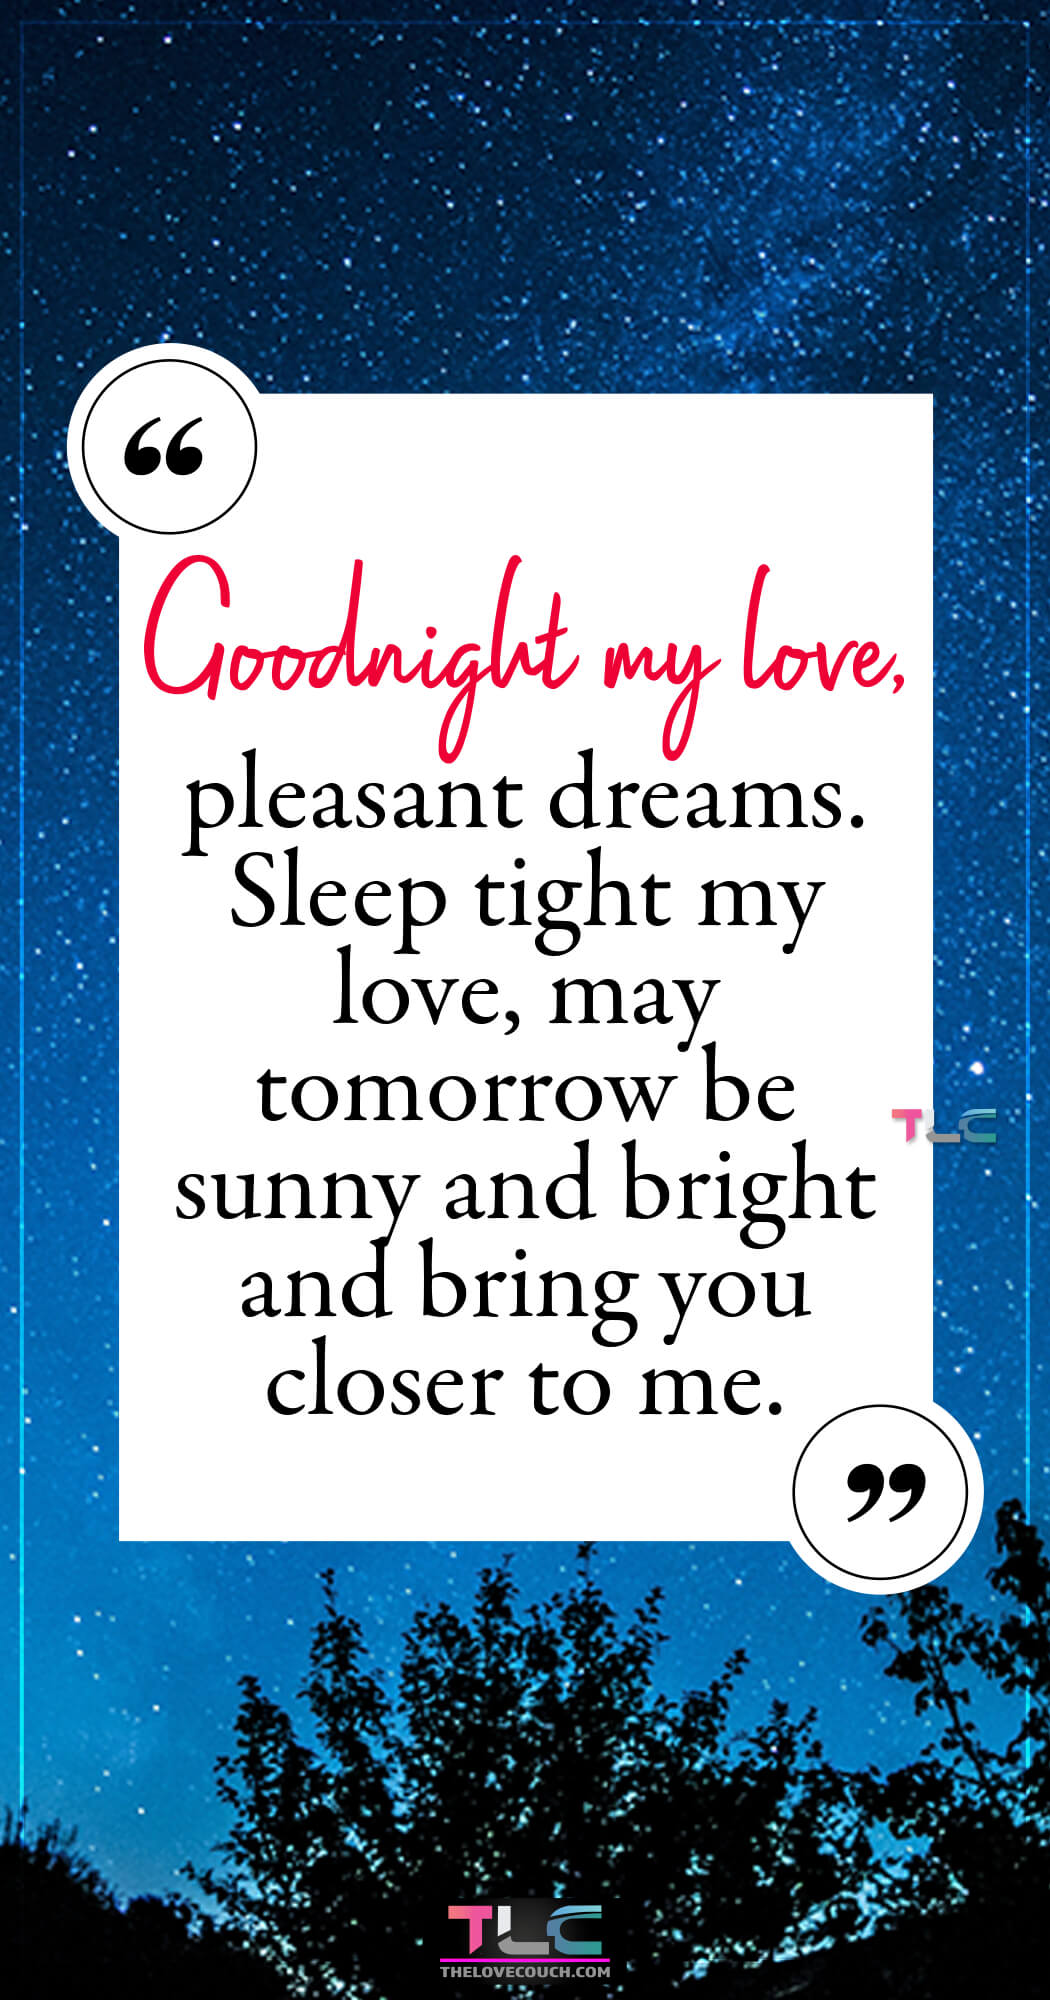 Goodnight my love, pleasant dreams. Sleep tight my love, may tomorrow be sunny and bright and bring you closer to me. Do you need some sweet and romantic good night text messages for him? In that case, here are some amazing romantic good night text messages for him to melt his heart and make him think of you all night. Also, check out these best of good night texts for him, flirty good night texts for him, and goodnight texts to boyfriend to wish him good night sweet dreams.